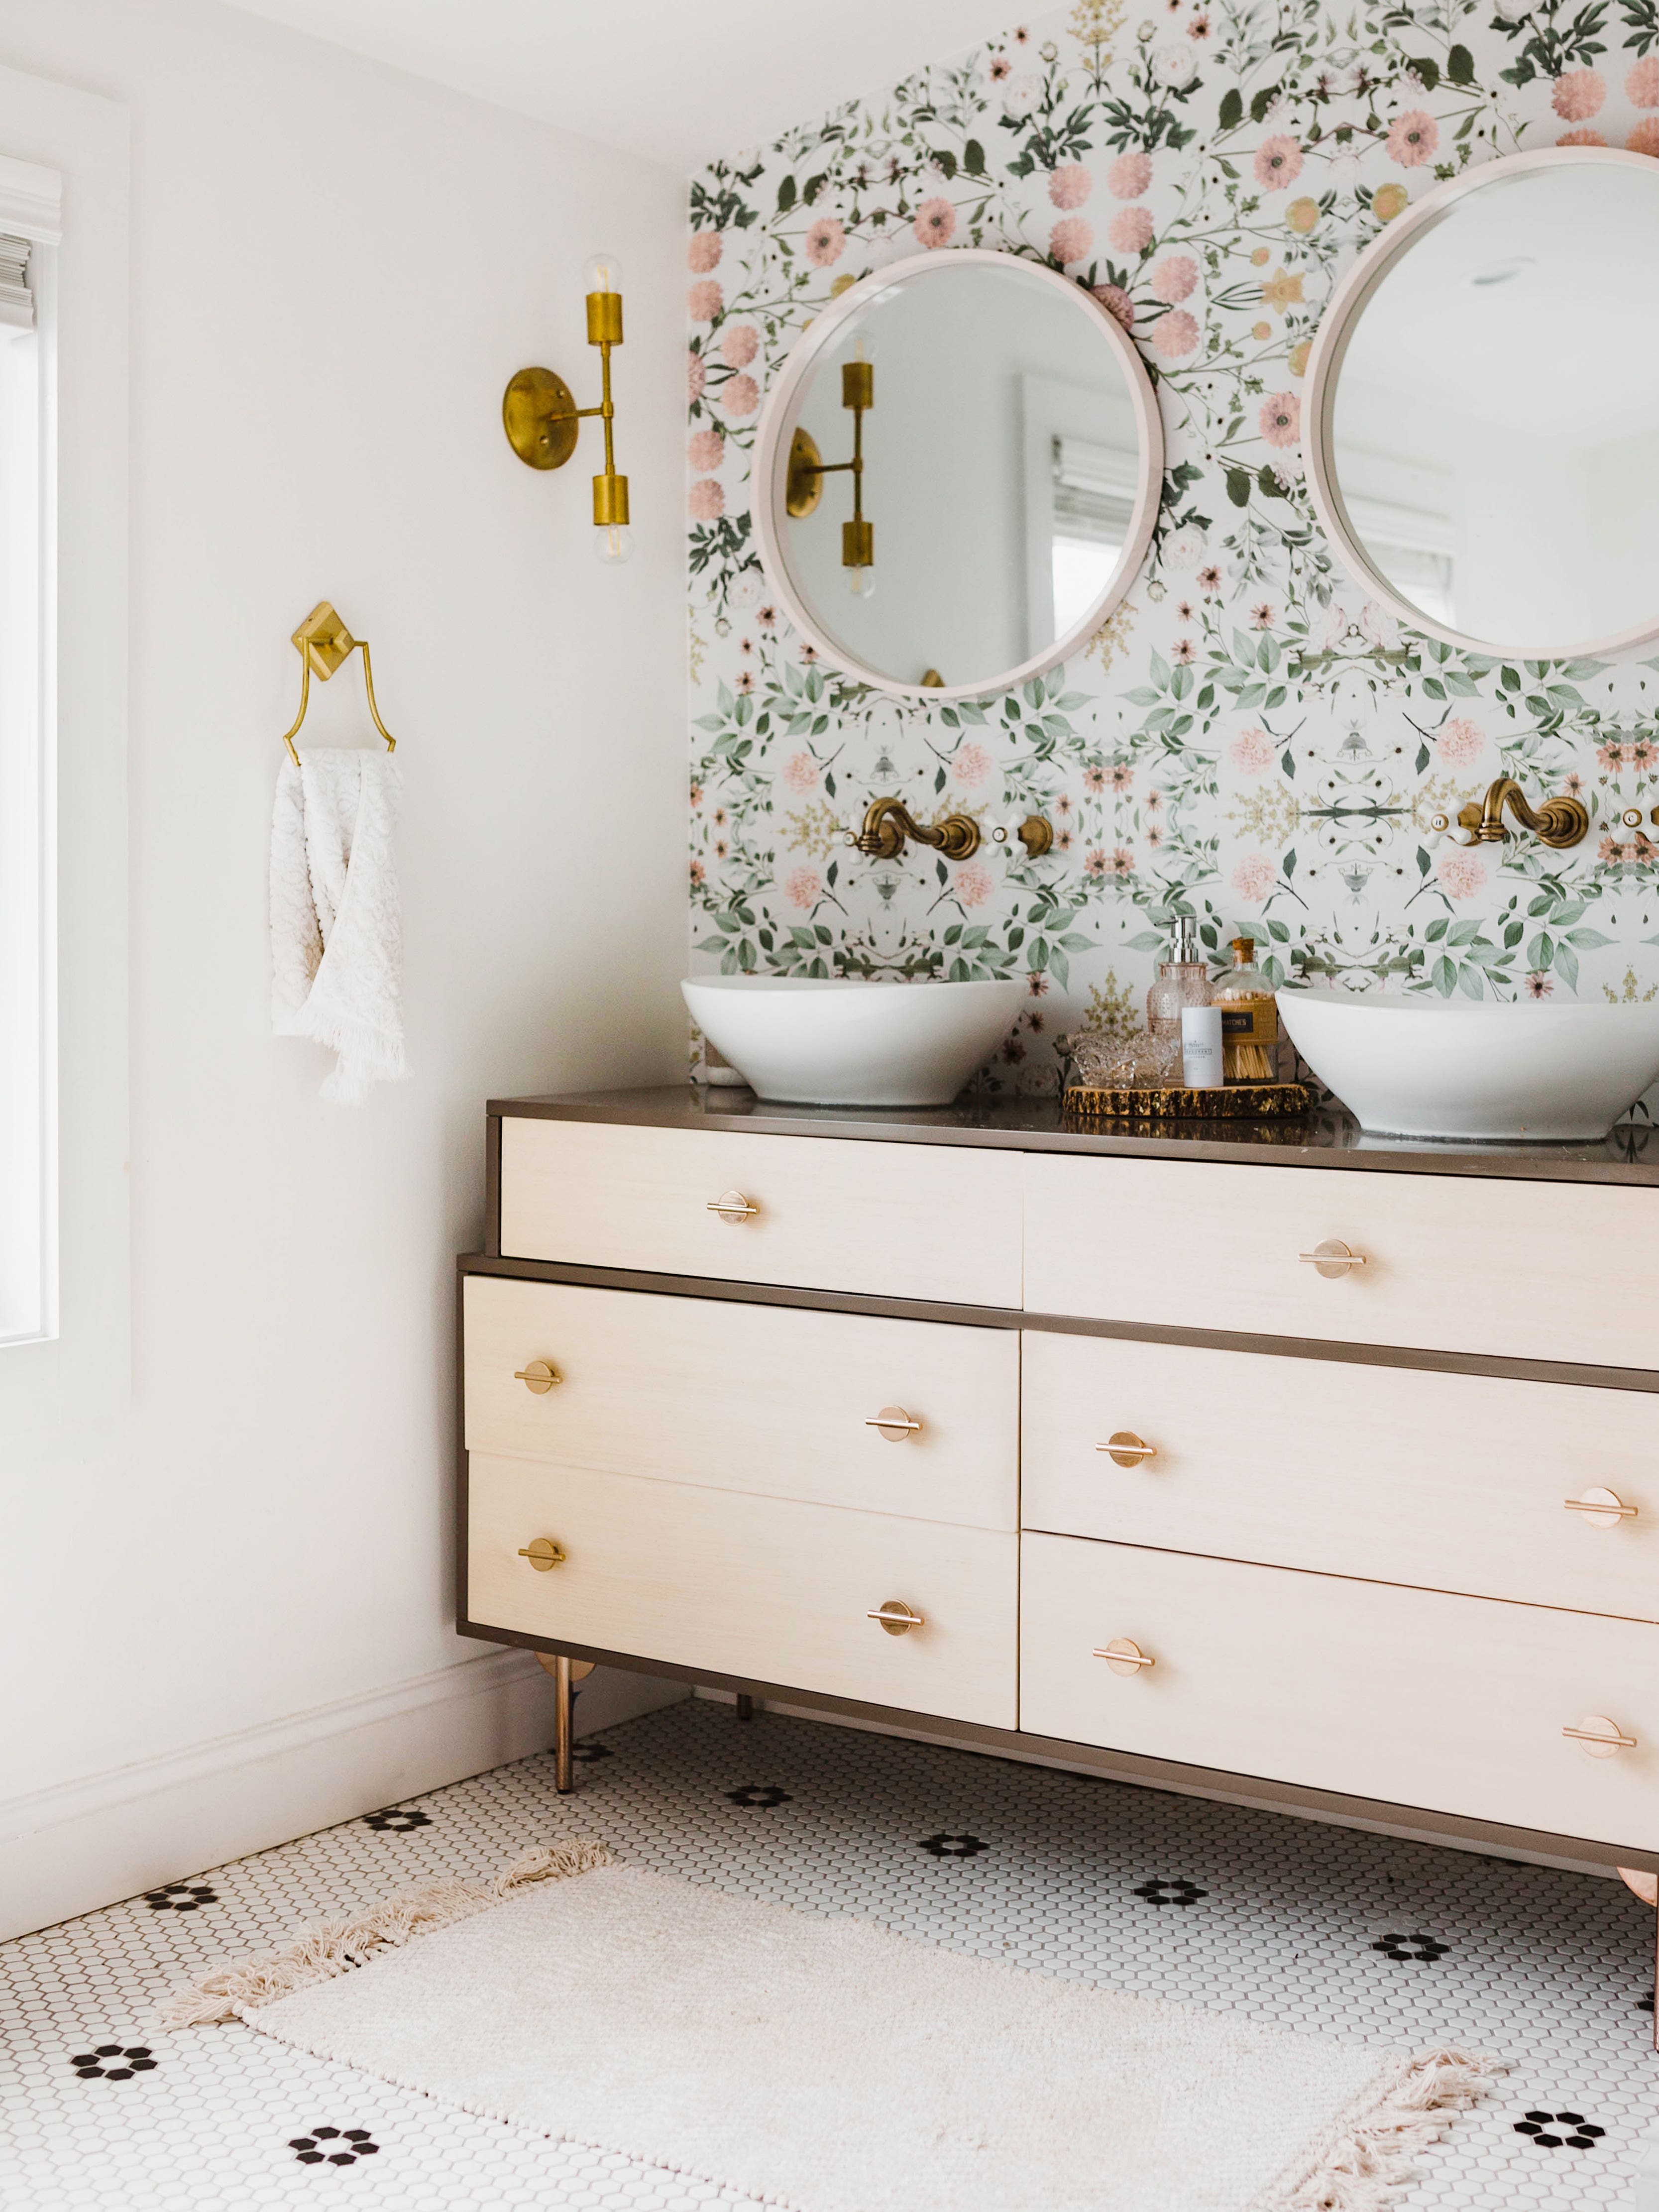 In This Charming Fixer-Upper, a West Elm Dresser Doubles as a Bathroom Vanity